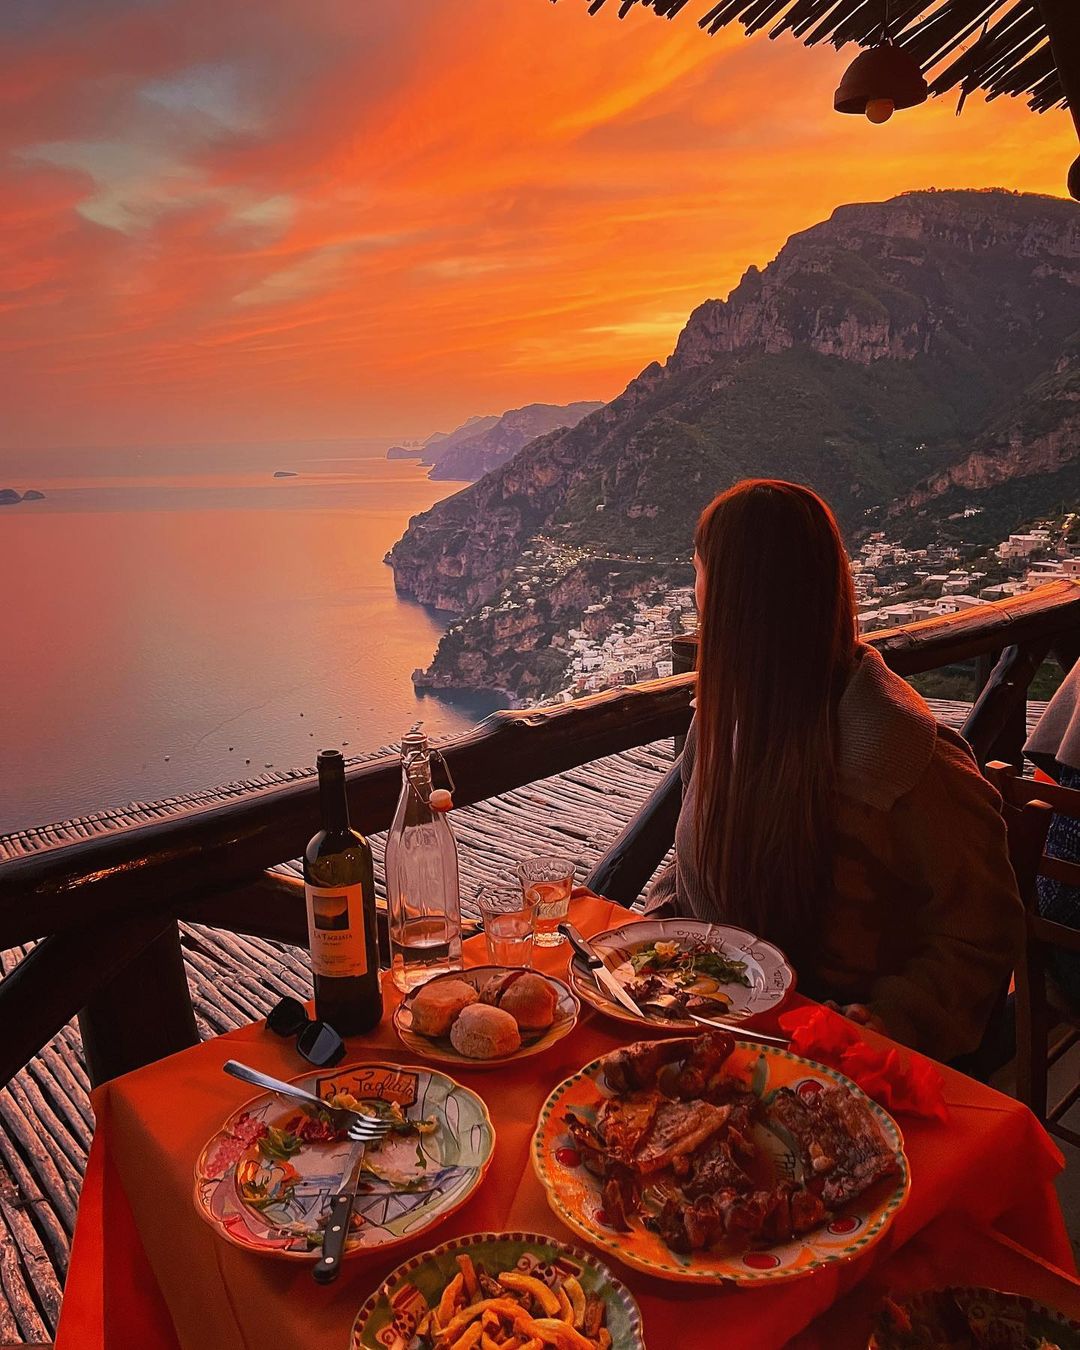 Incredible sunset hues in Positano at Trattoria La Tagliata - Best Outdoor Restaurants in Europe